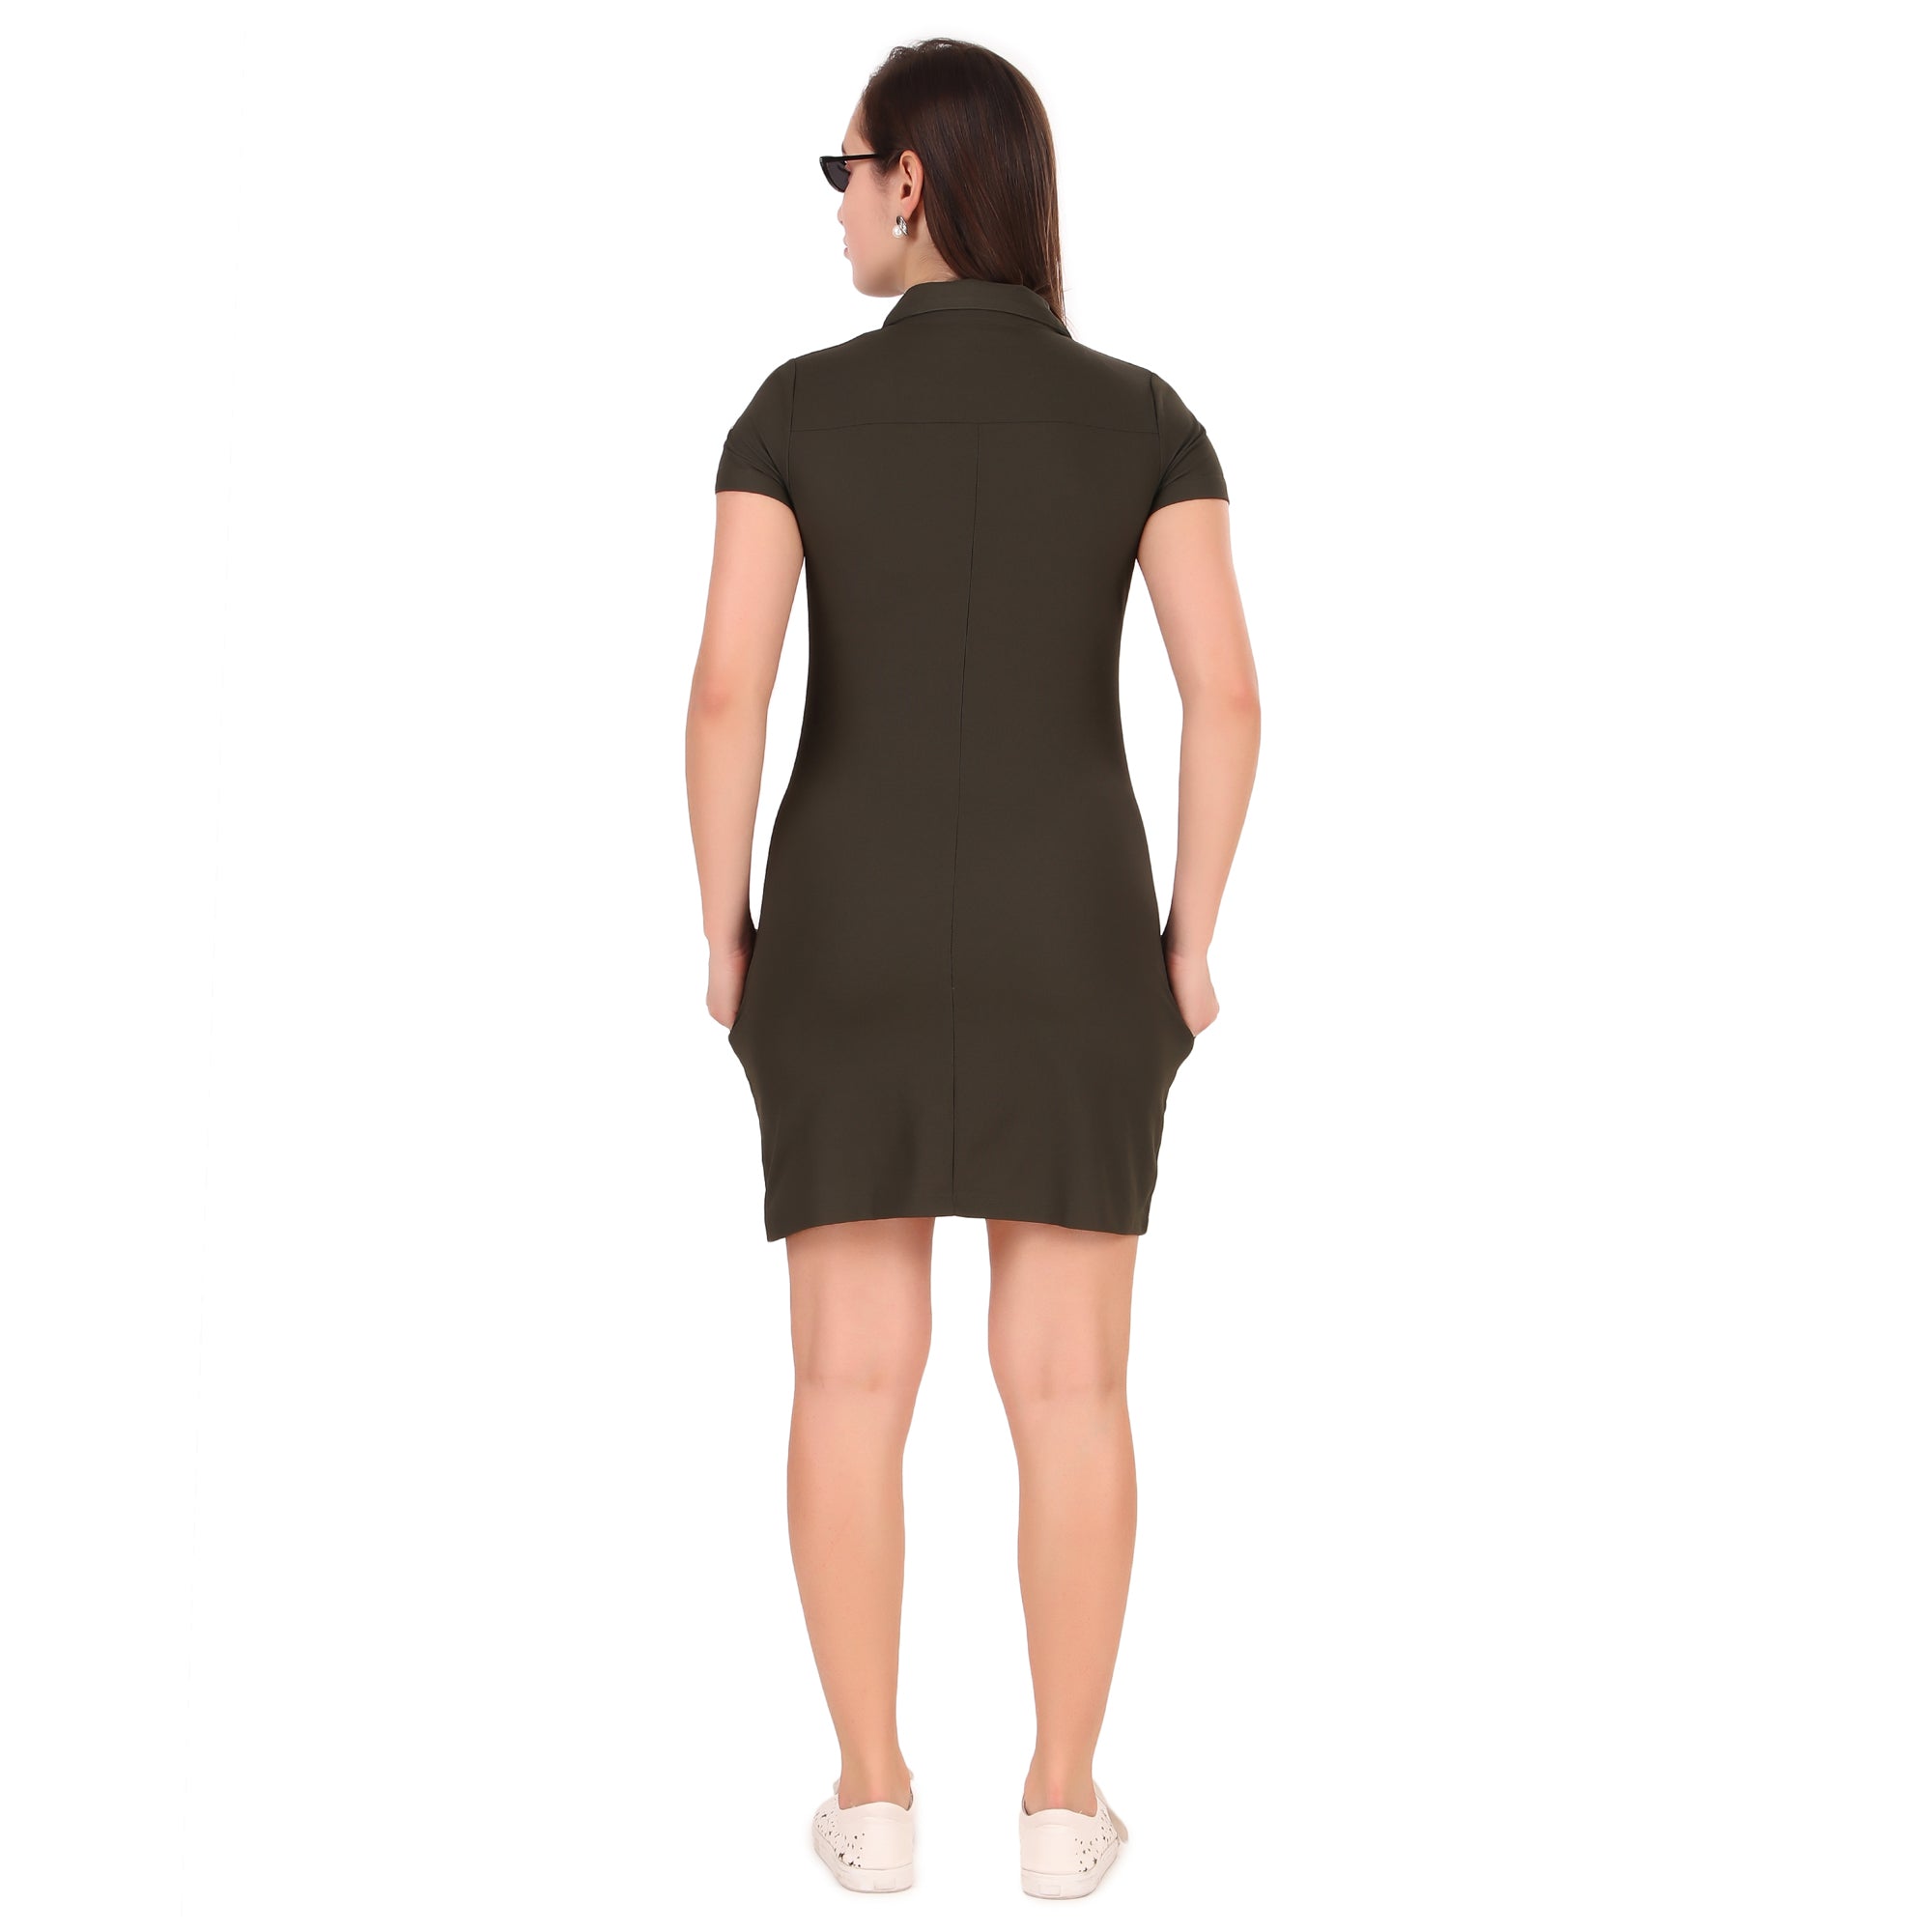 Activewear Collar Neck Dress For Women (Olive)